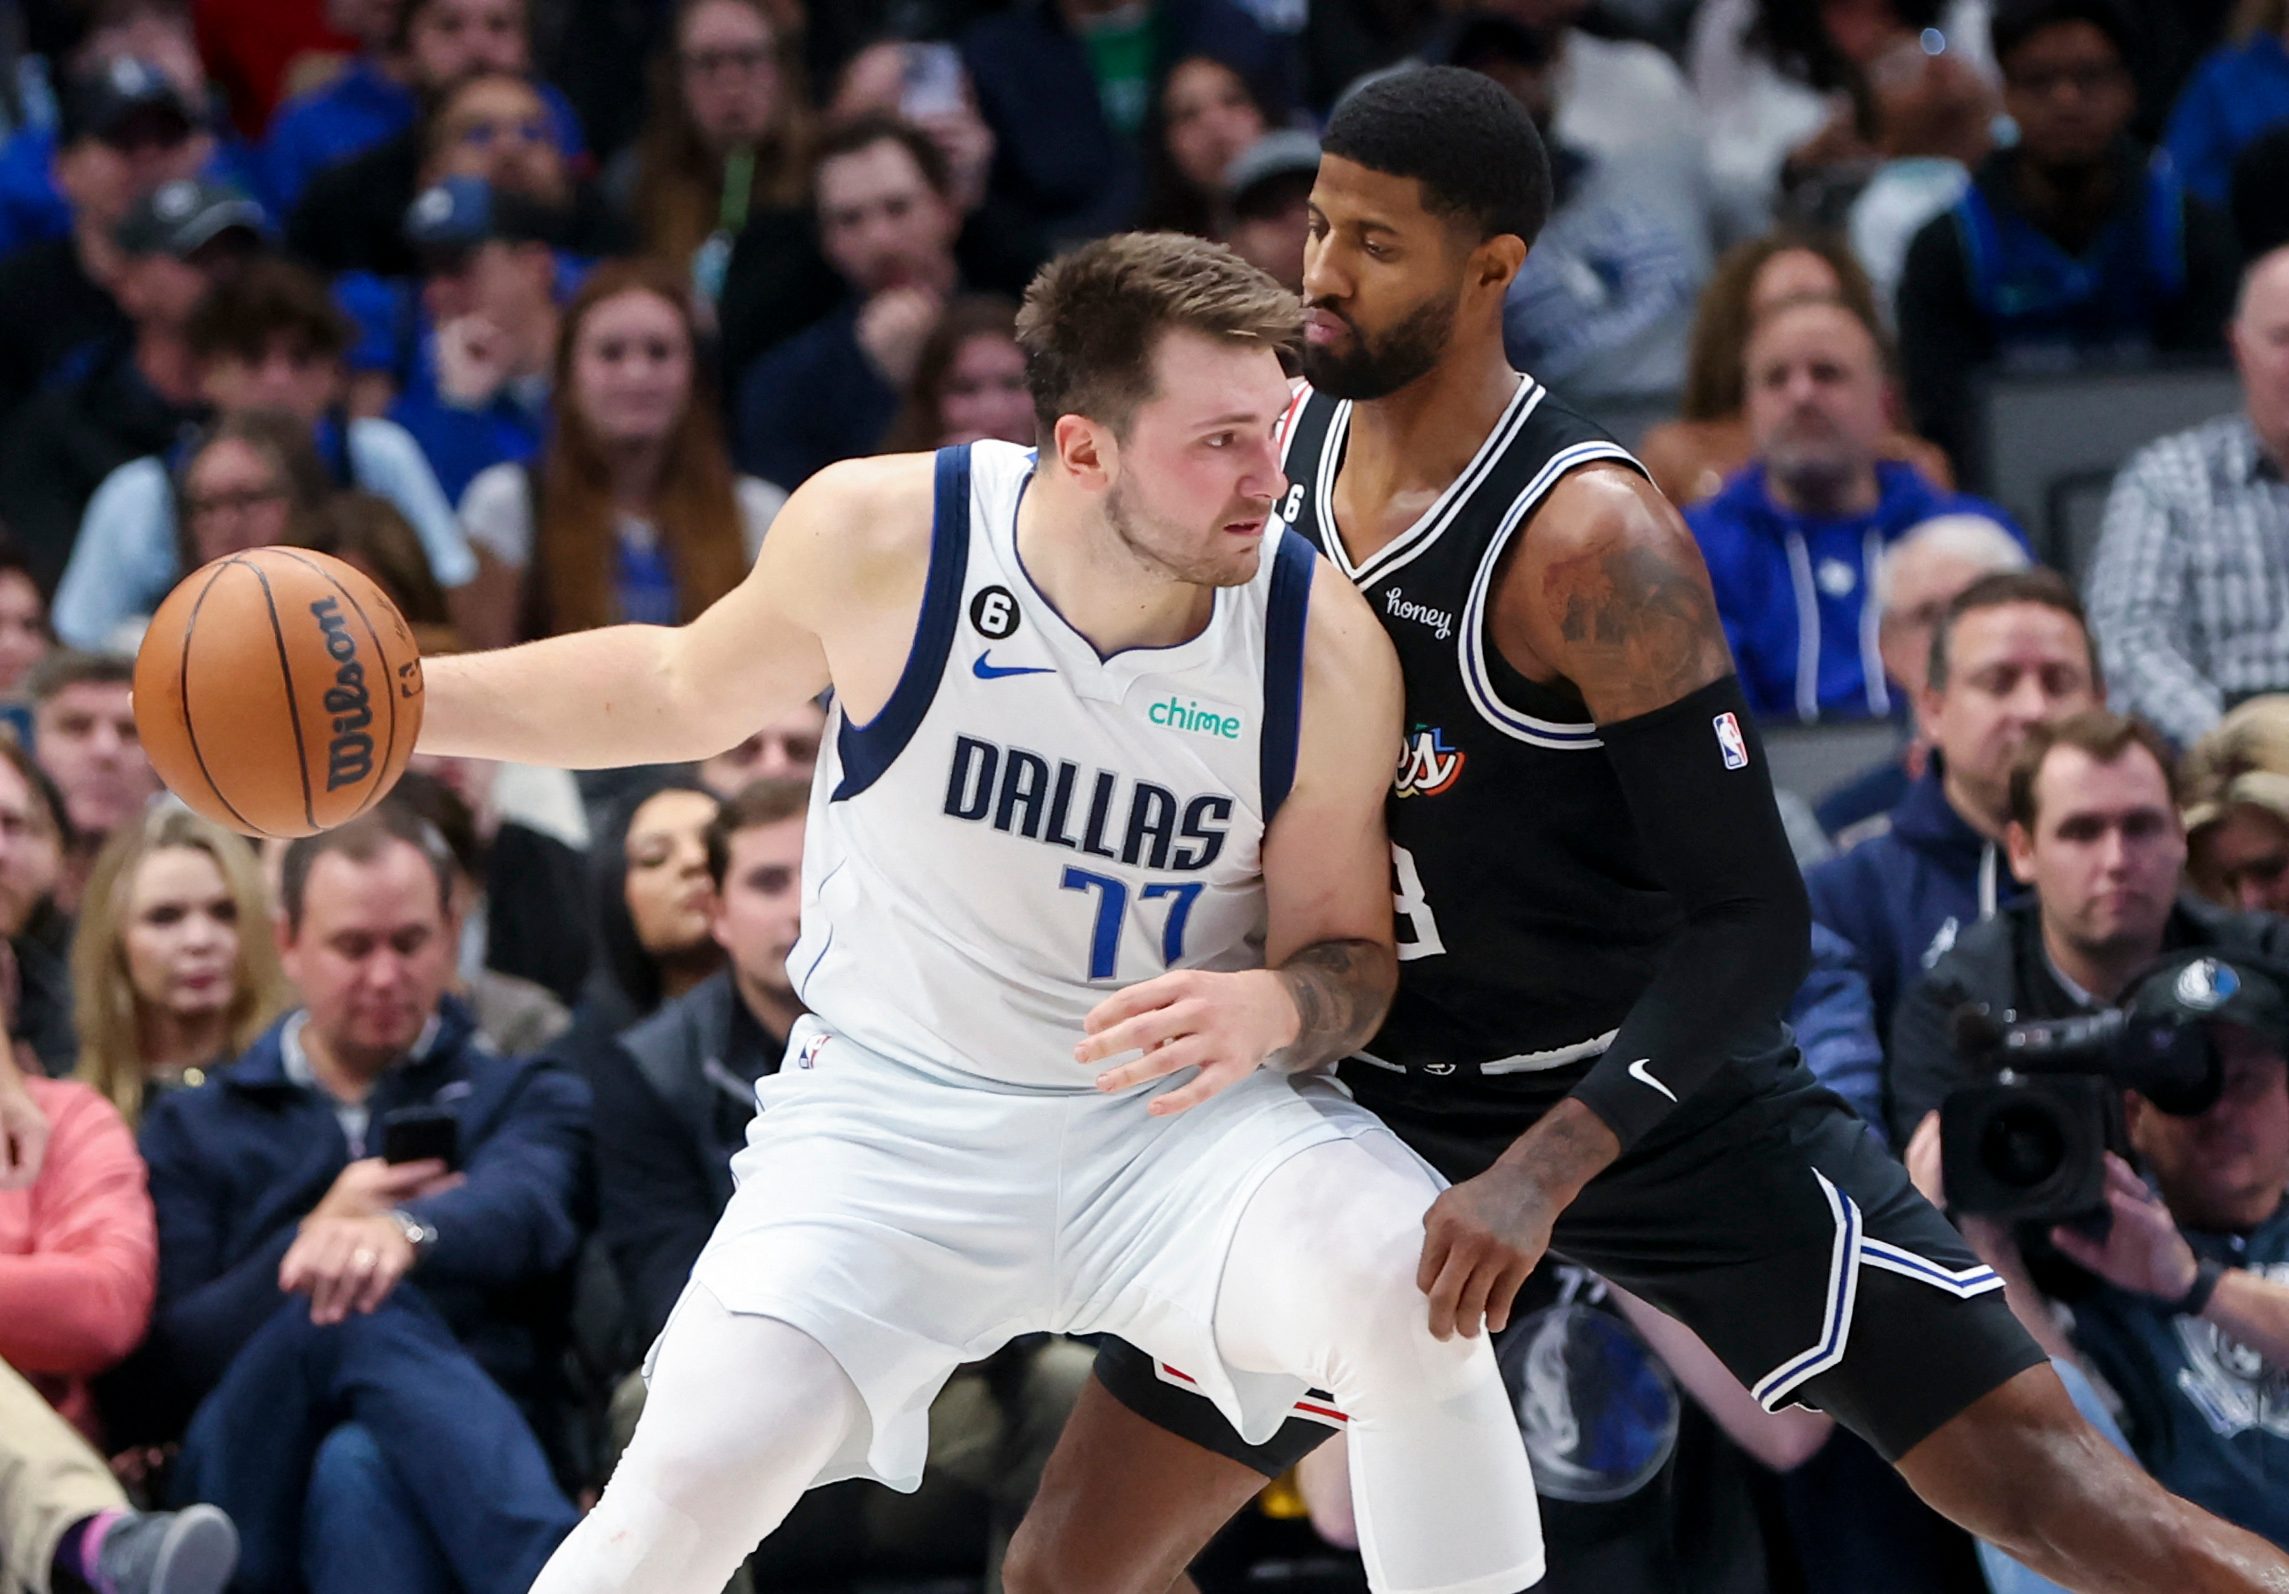 Report: Mavs star Luka Doncic to play in Game 4 vs. Clippers